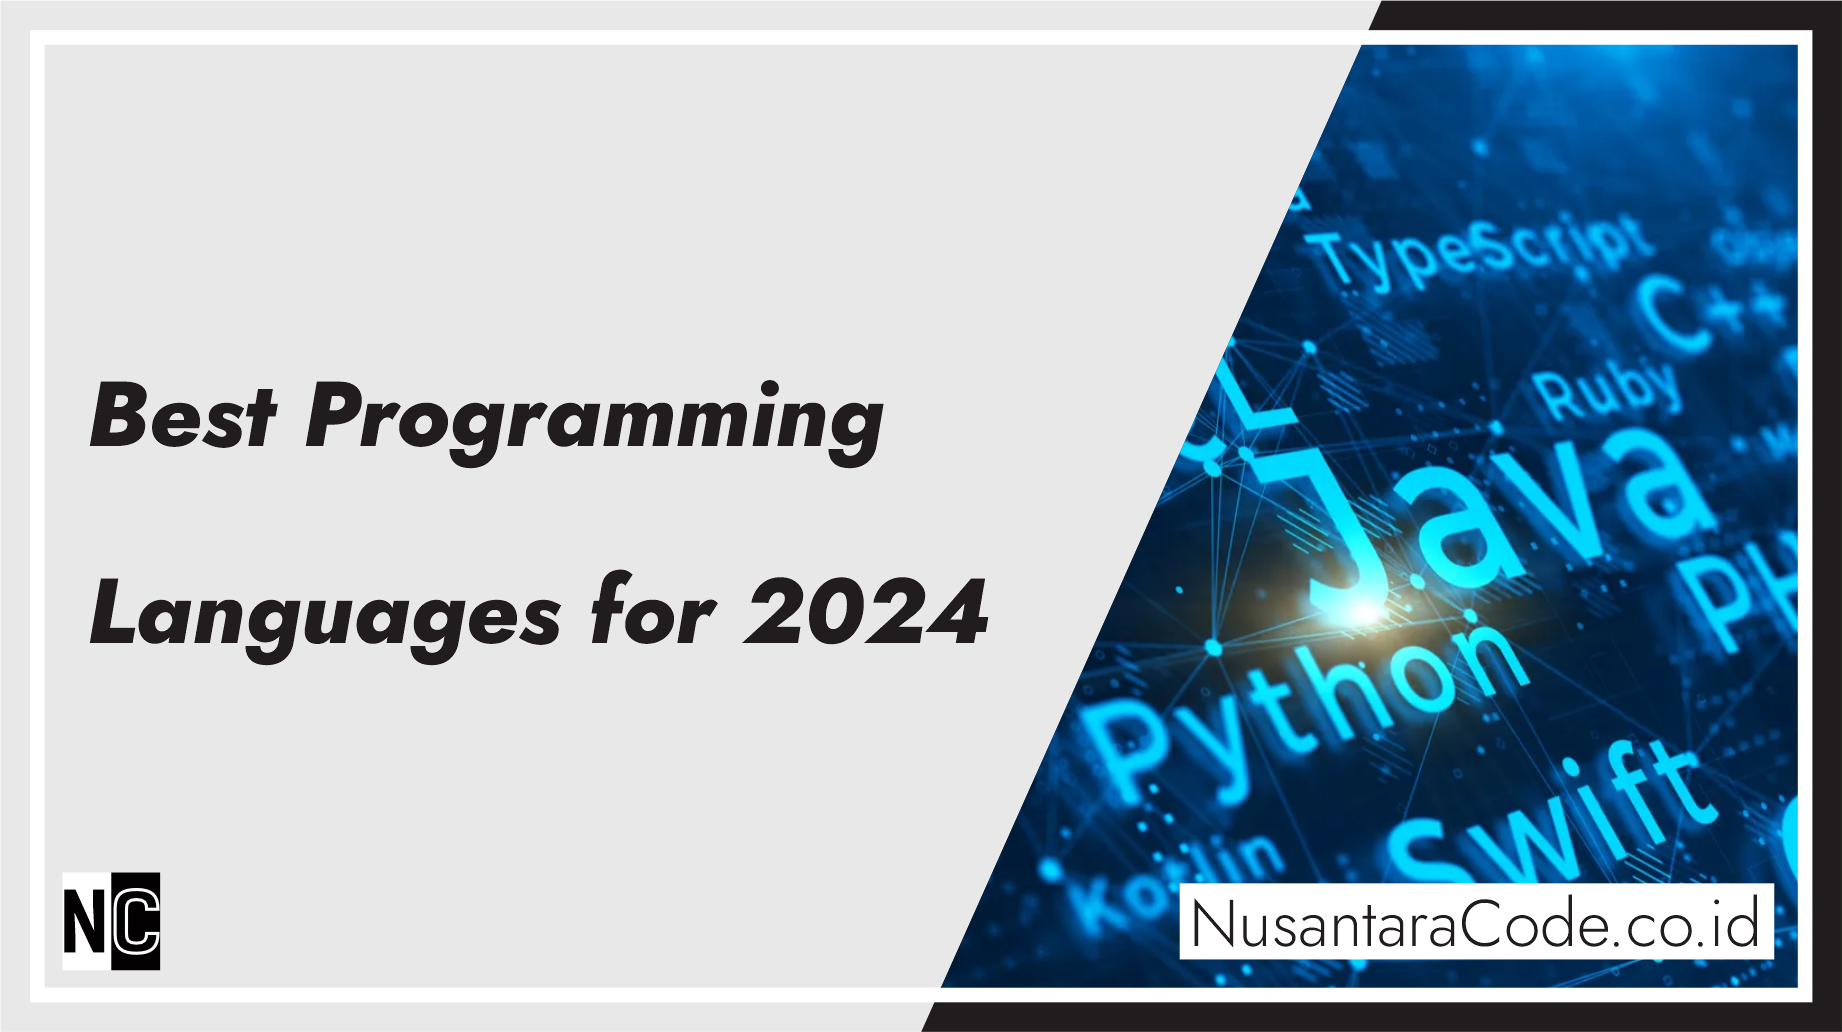 Best Programming Languages for 2024